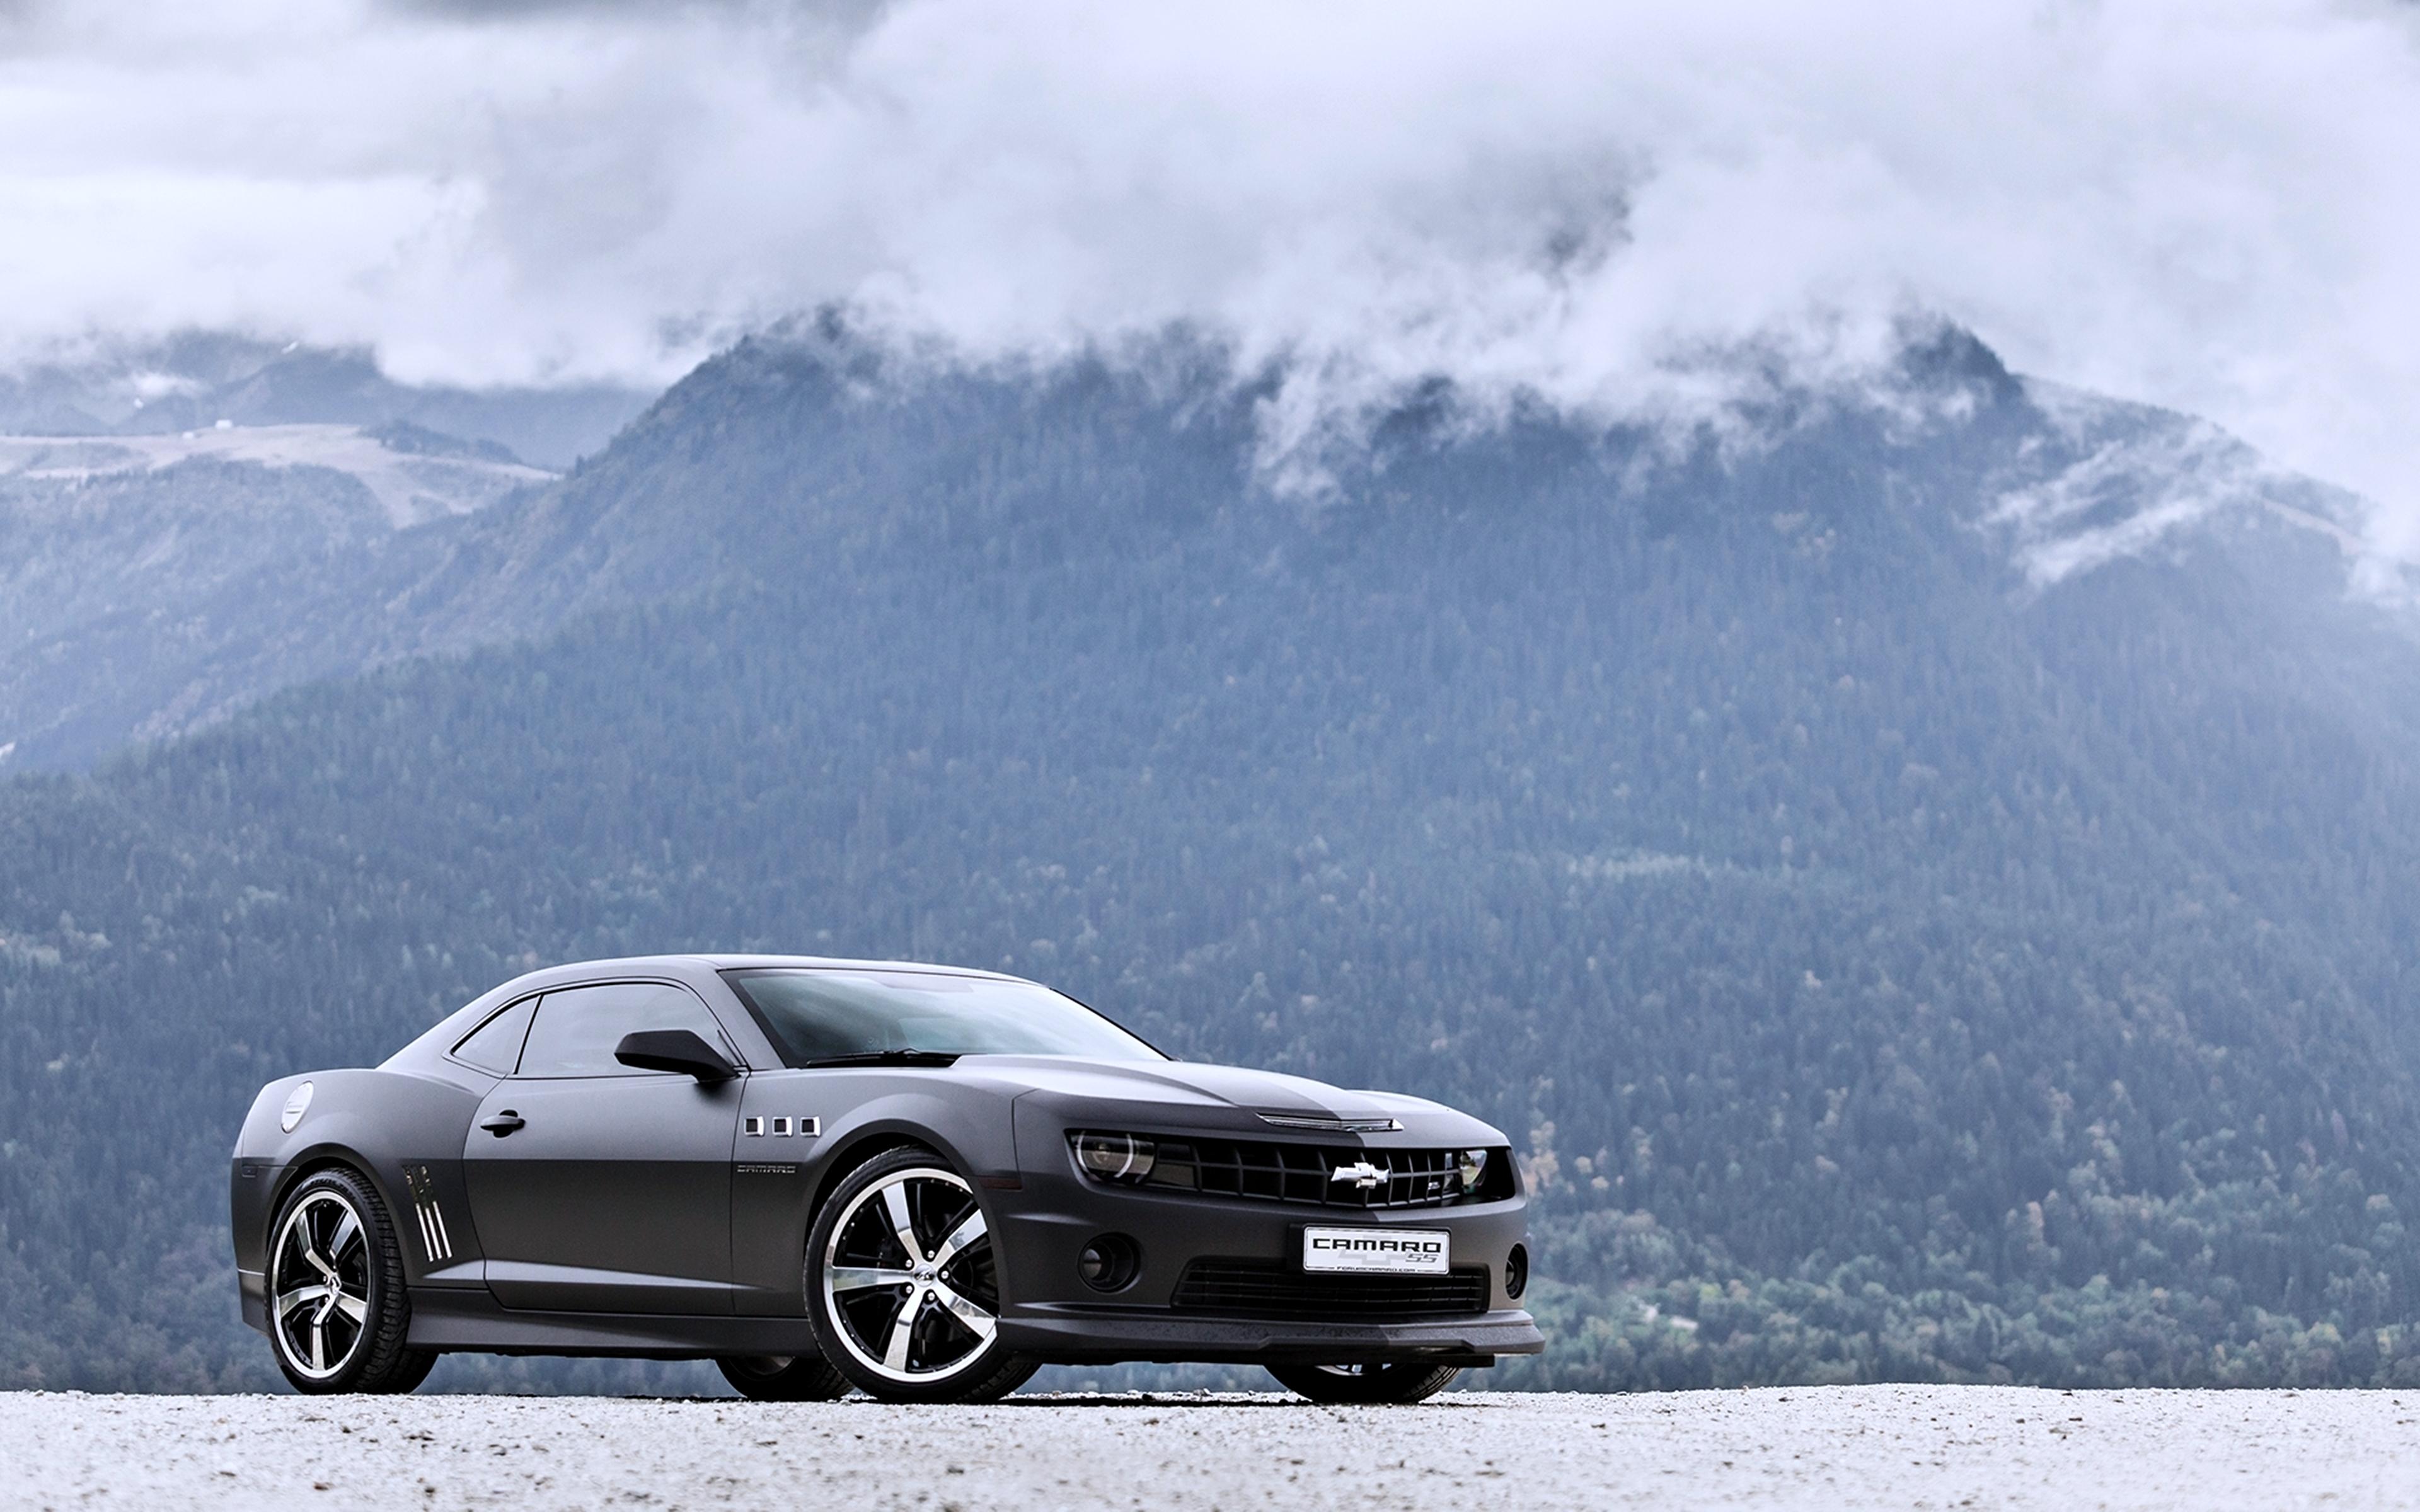 Chevrolet Camaro SS Wallpapers HD Download 3840x2400